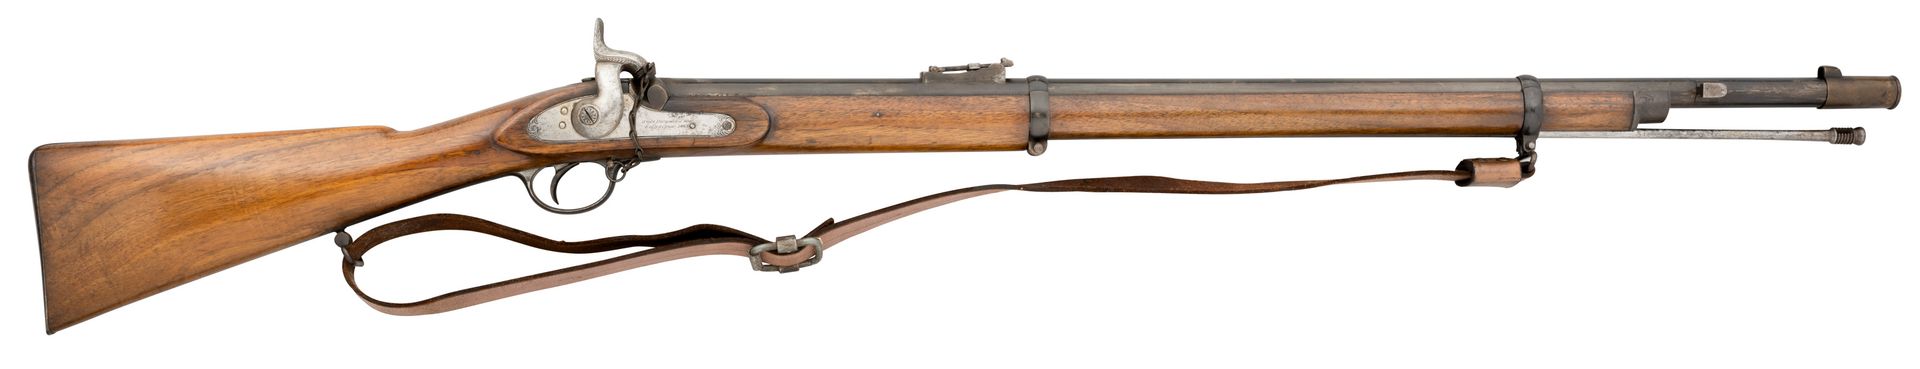 A .577 CALIBRE PERCUSSION MILITARY RIFLE BY JOHN DICKSON AND SONS A .577口径步枪，EDI&hellip;